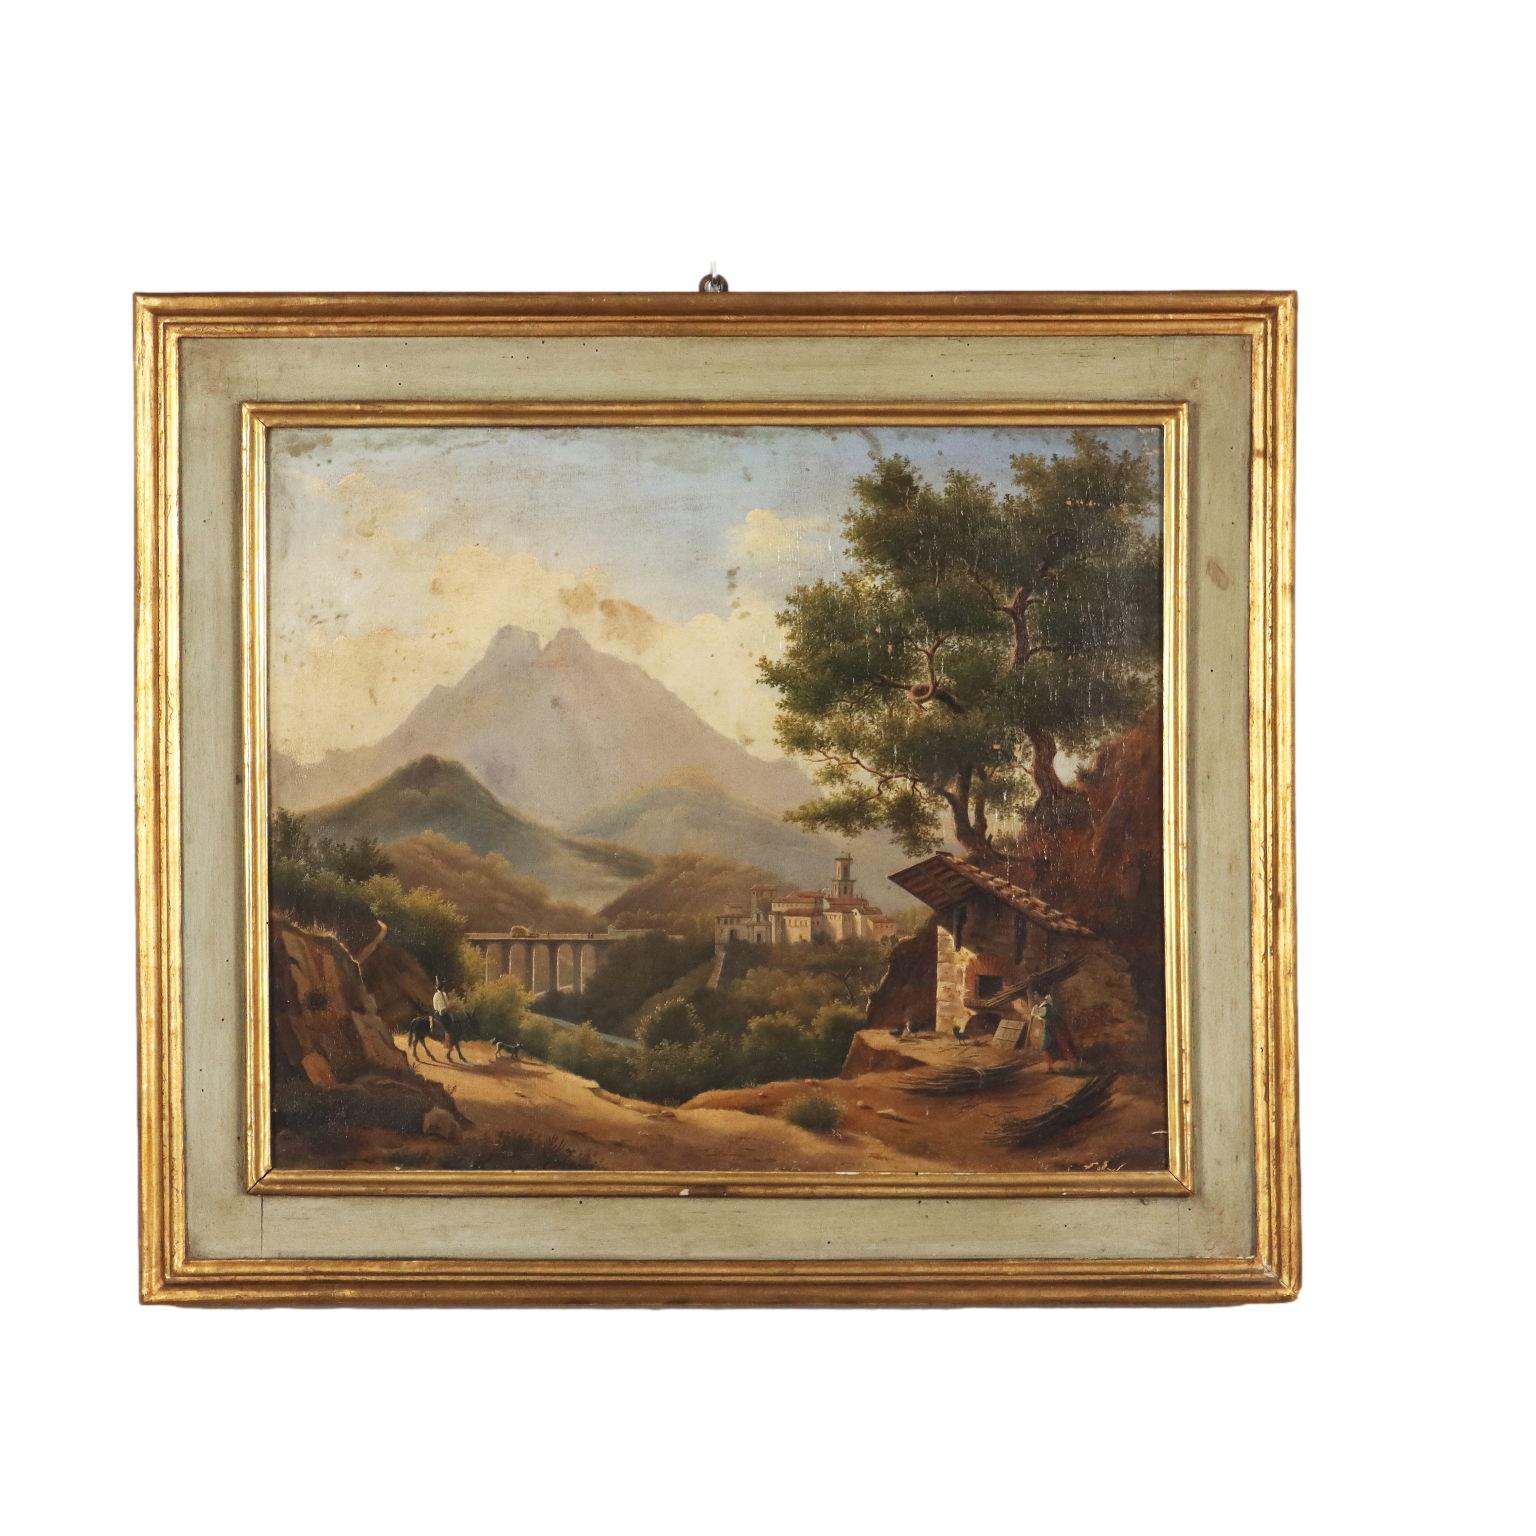 Unknown Landscape Painting - Landscape with Figures and Bread Oven by Giacomo Micheroux, XIXth century